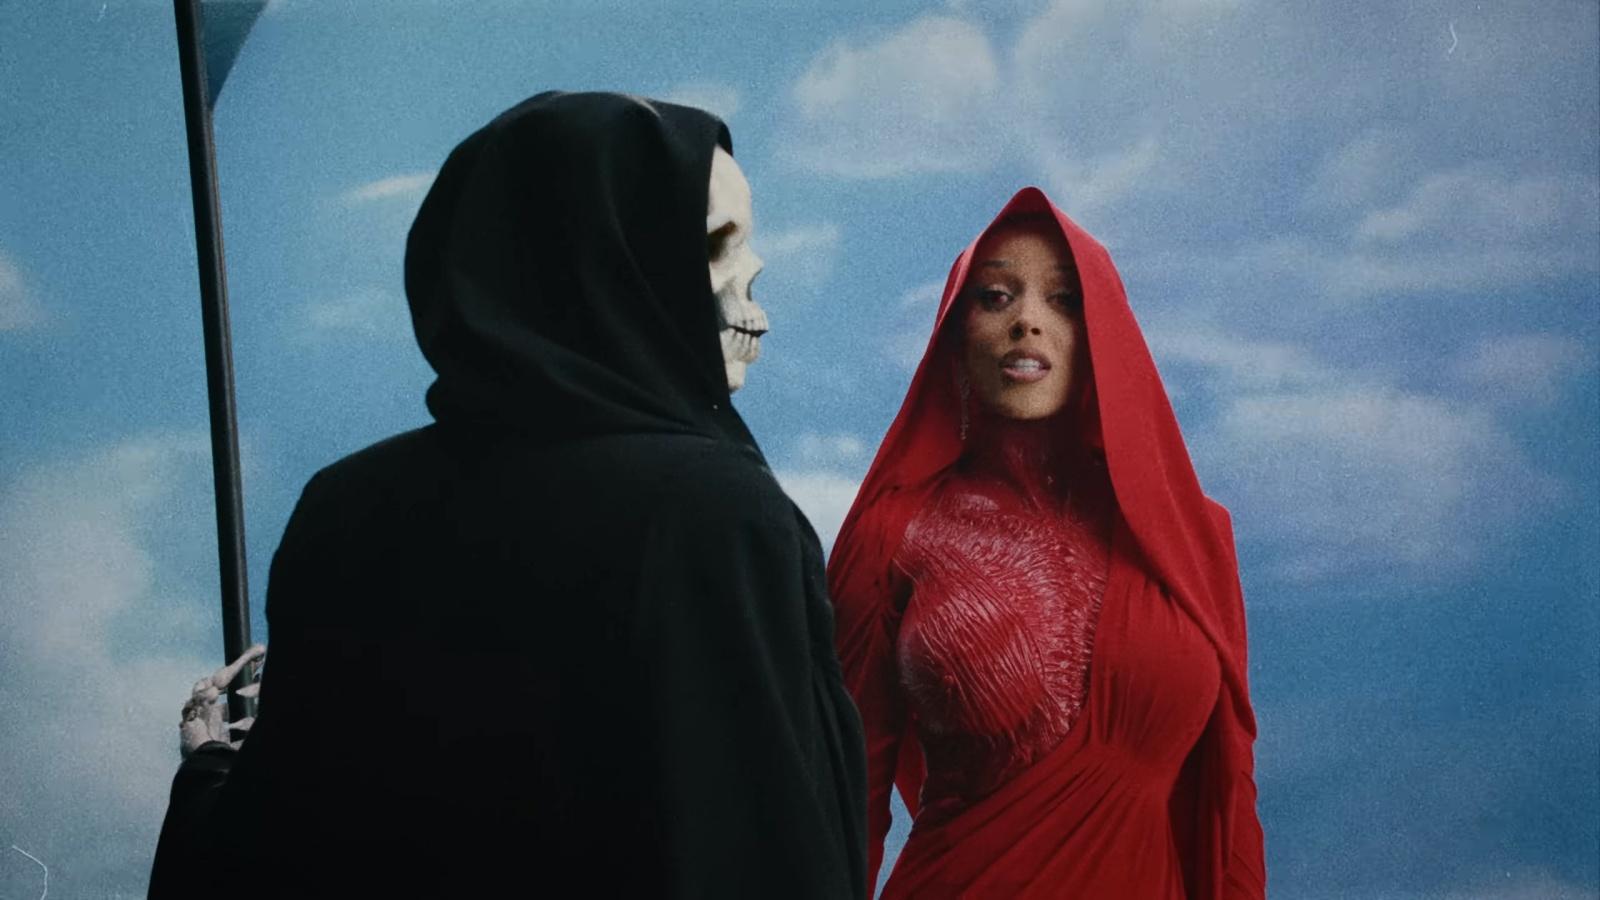 Doja Cat in a blood read outfit standing next to the Grim Reaper